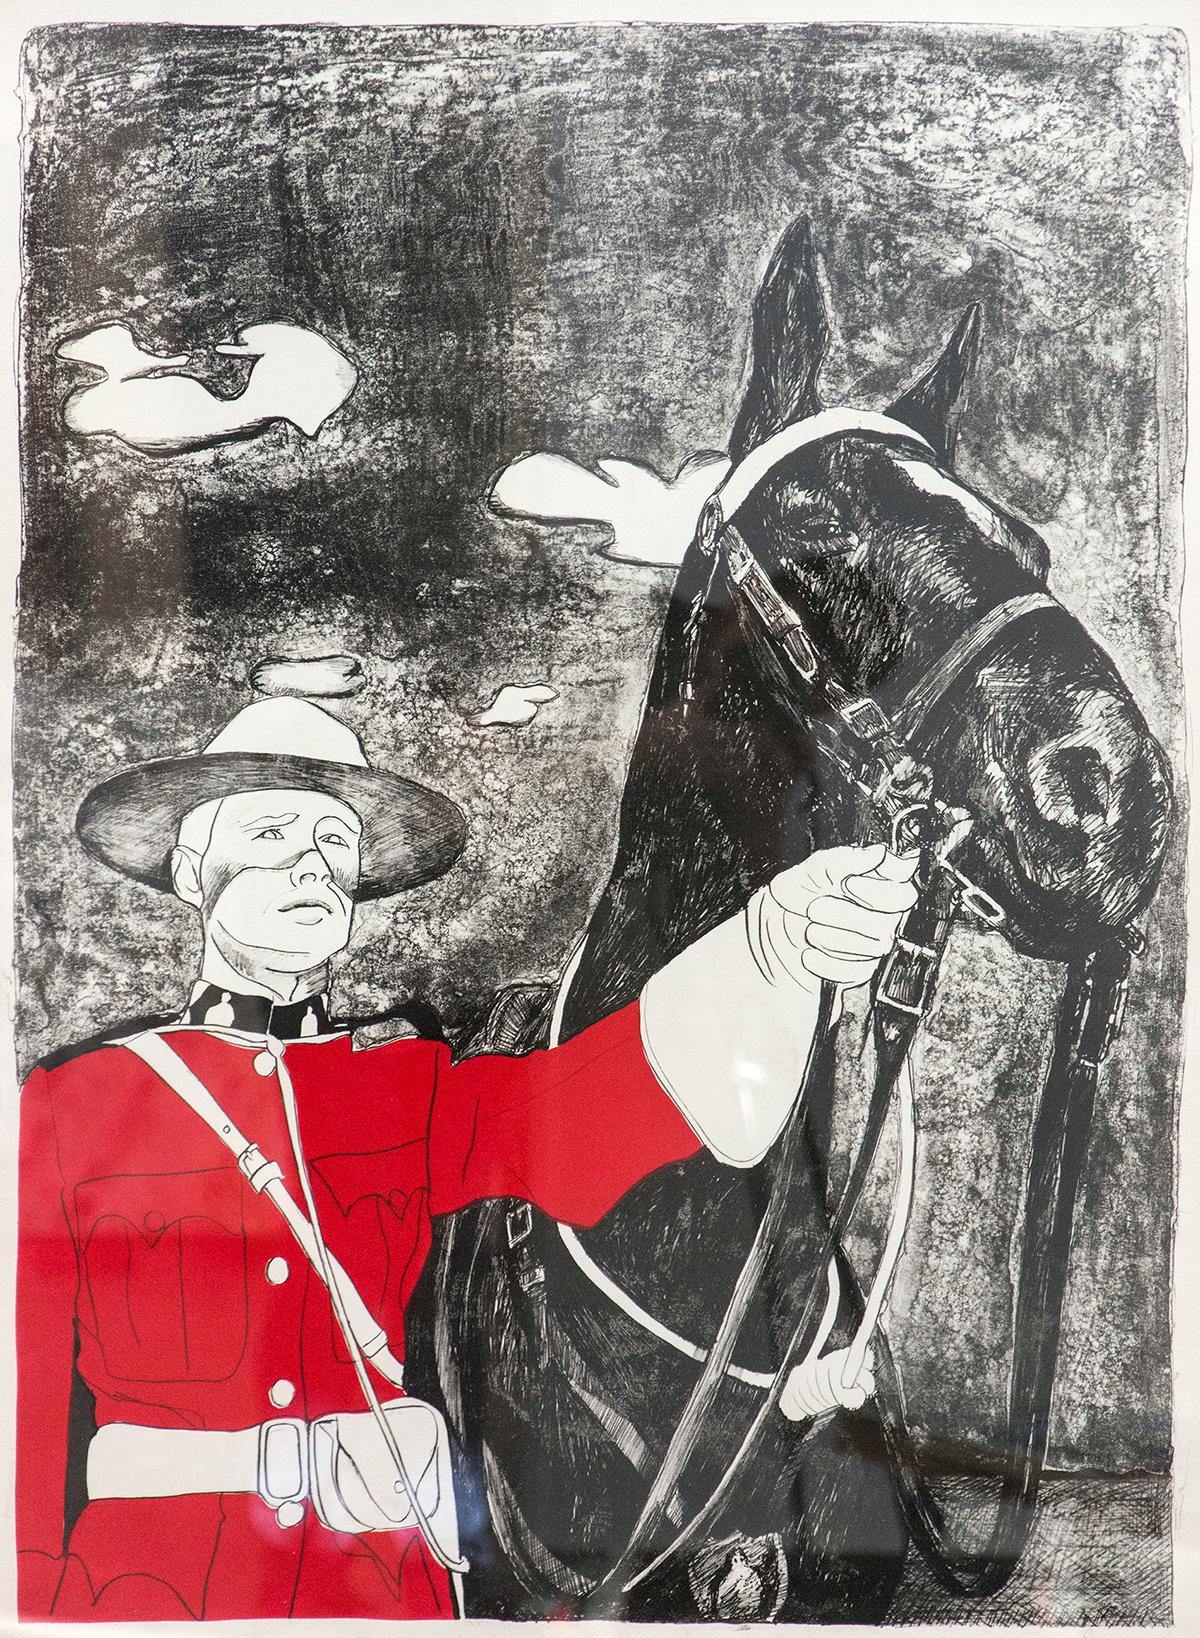 Charles Pachter Figurative Art - Noblesse Oblige 1/1 (Nobility Obliges) - pop-art, Canadiana, lithograph print